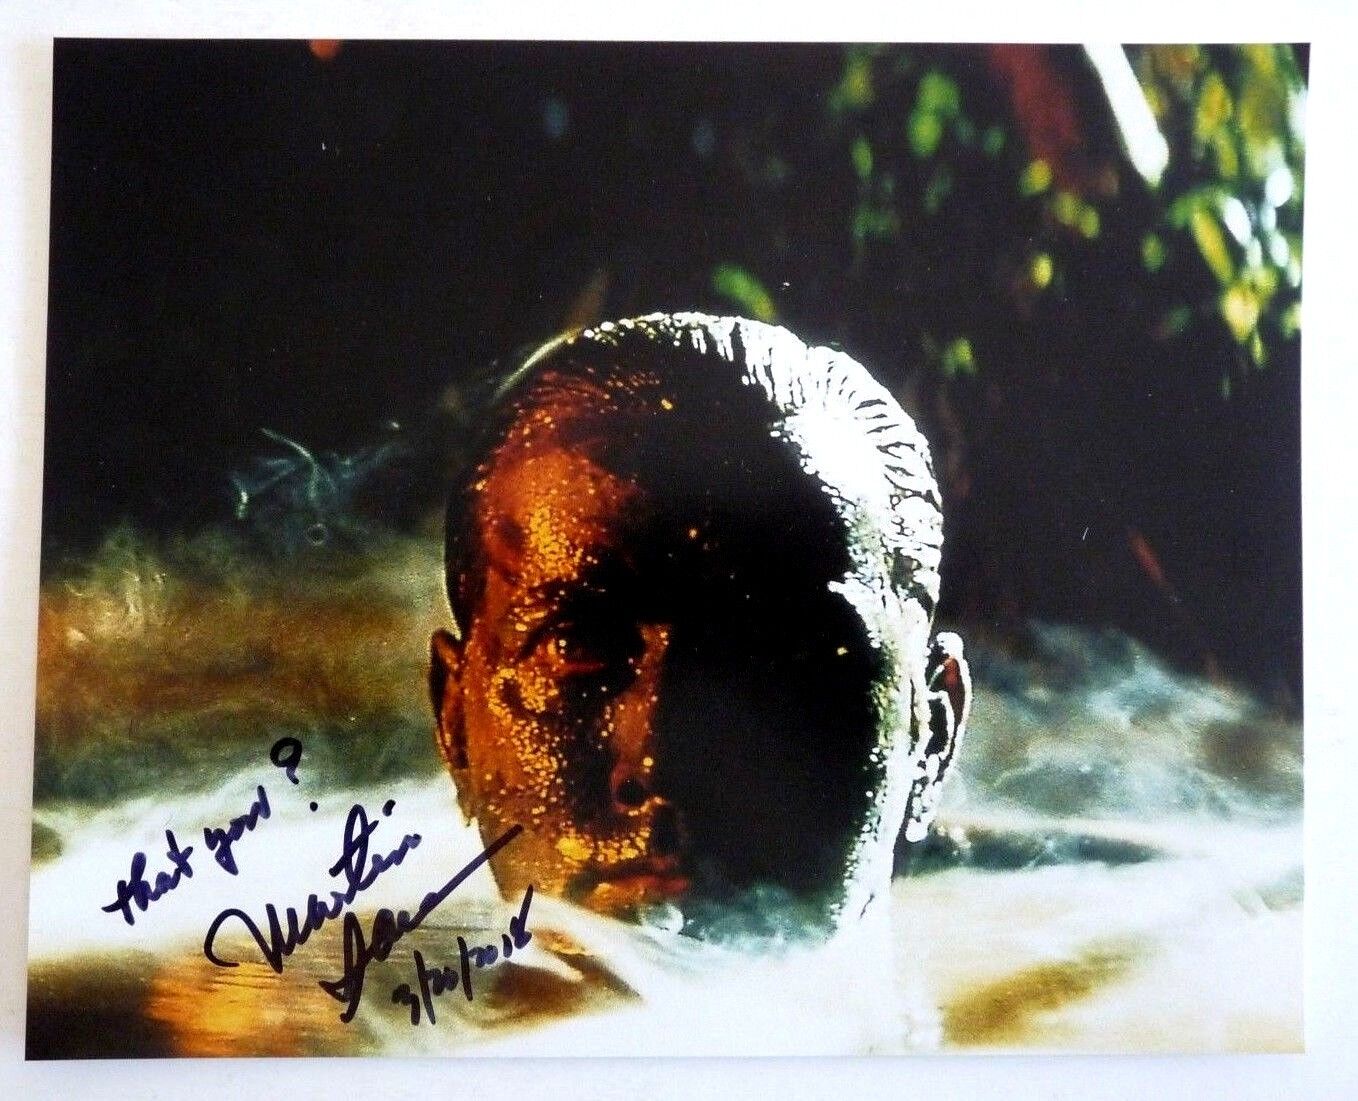 Martin Sheen Signed Apocalypse Now 8x10 Photo Poster painting W Inscription BAS Certified #1